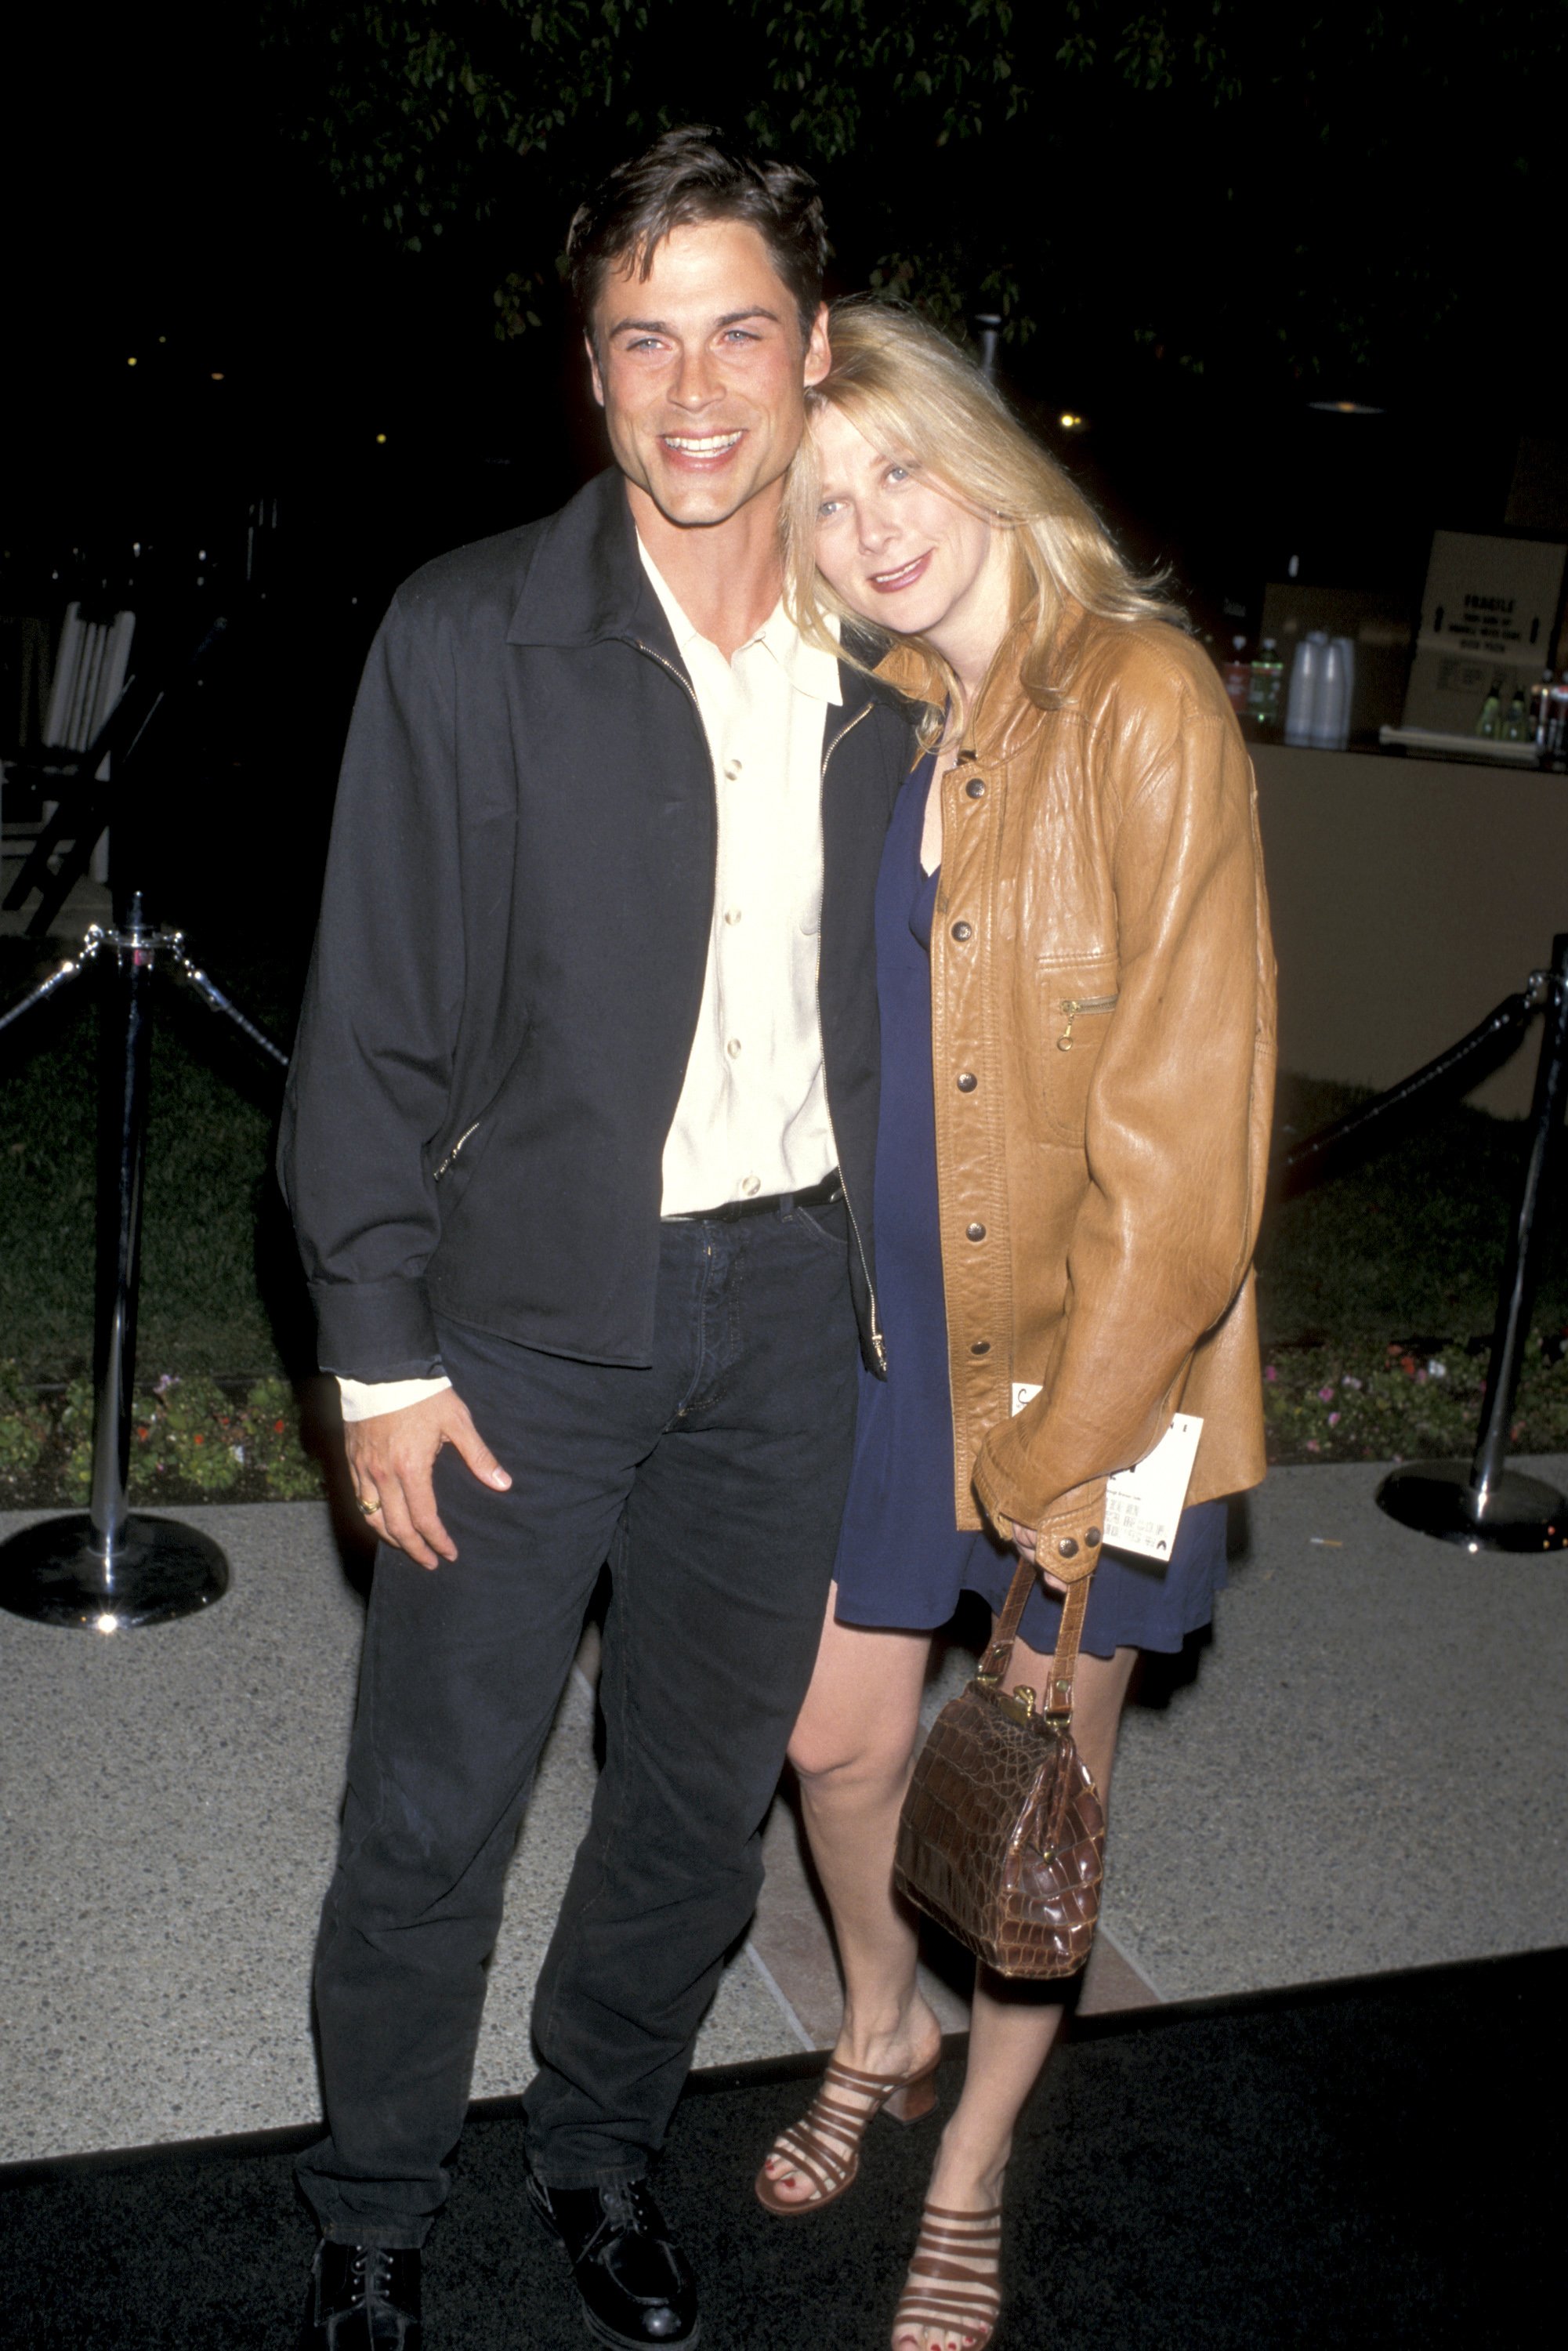 Rob Lowe and Sheryl Berkoff during "Tommy Boy" Los Angeles Premiere at Paramount Studios in Hollywood, California, United States. | Source: Getty Images